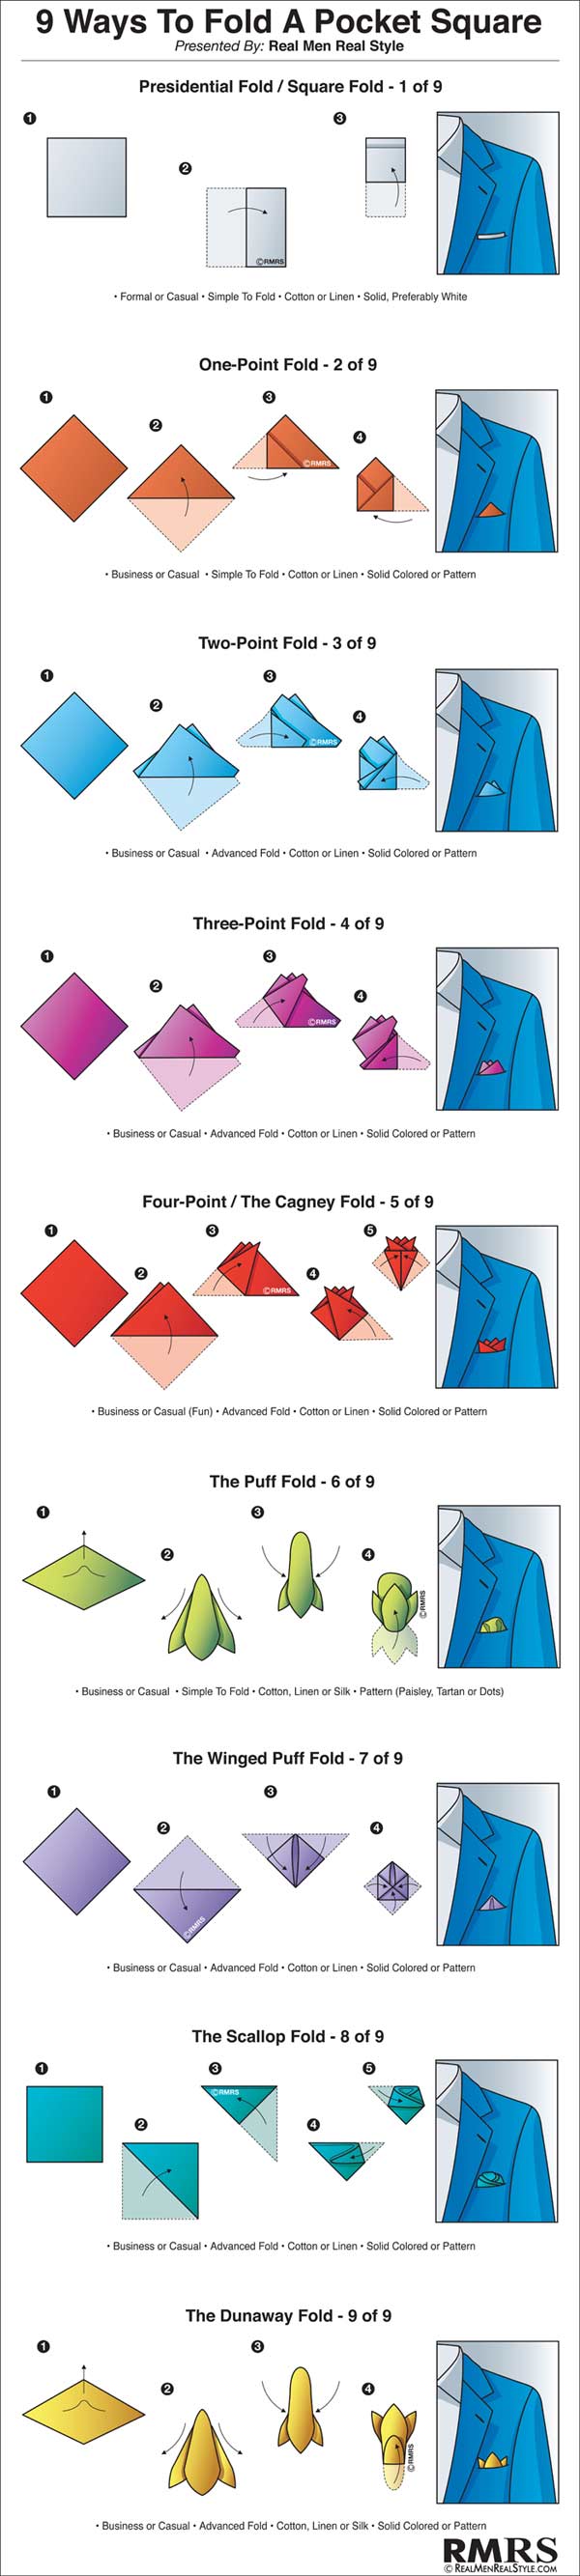 How told fold pocket squares for weddings